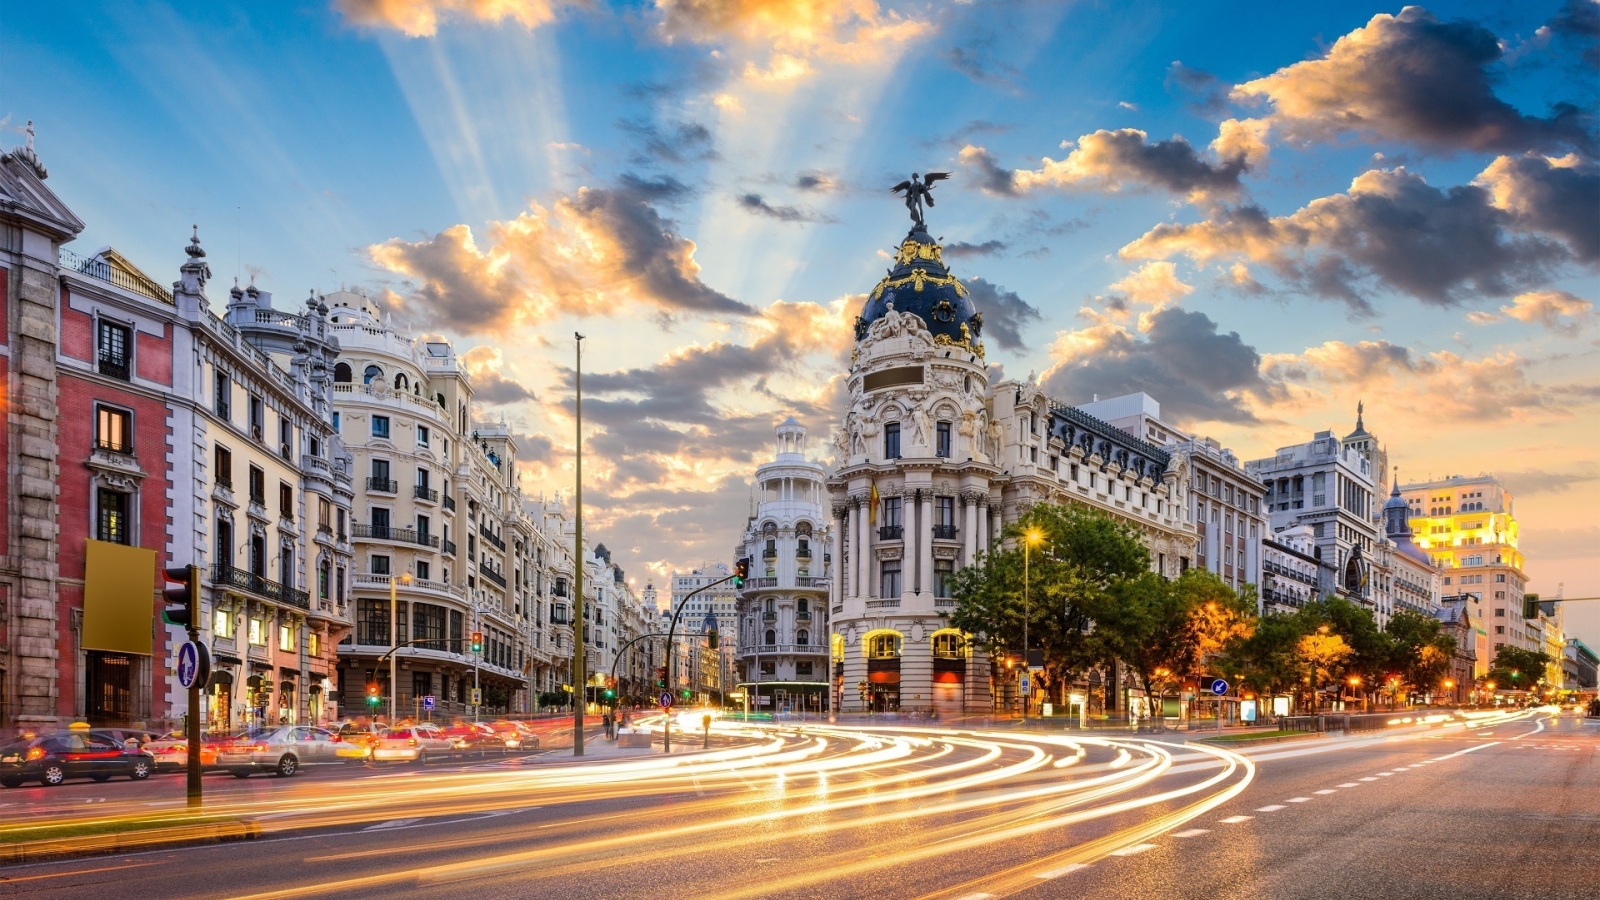 Wallpaper Buildings Road Lights Madrid Sunset Clouds Resolution